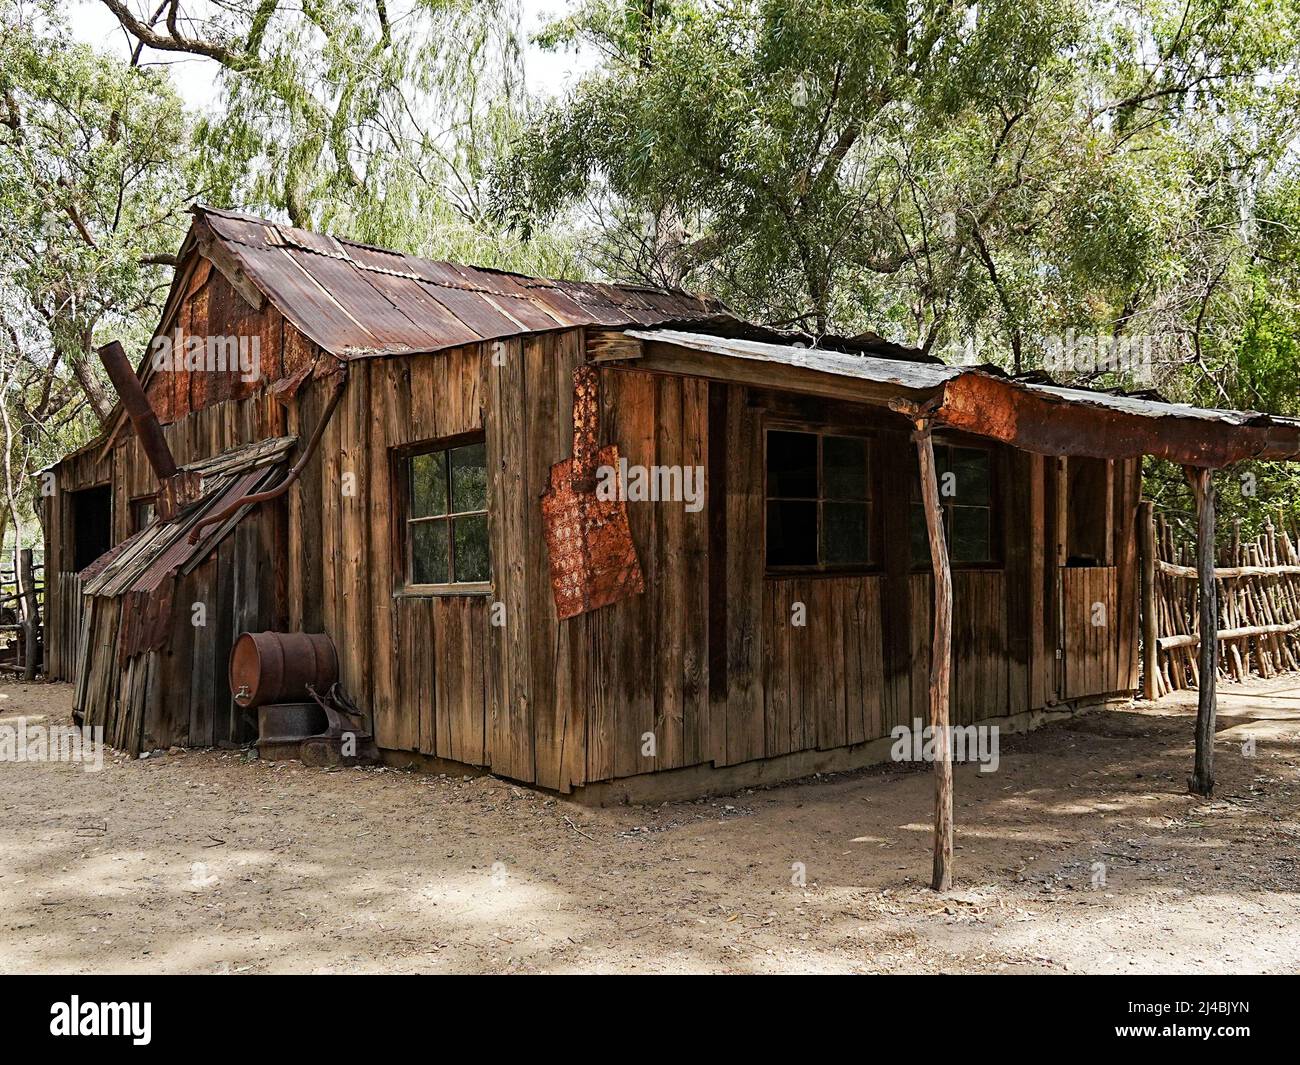 A recreation of a sheep shearing operation in the outback is shown at a desert botanical park Stock Photo